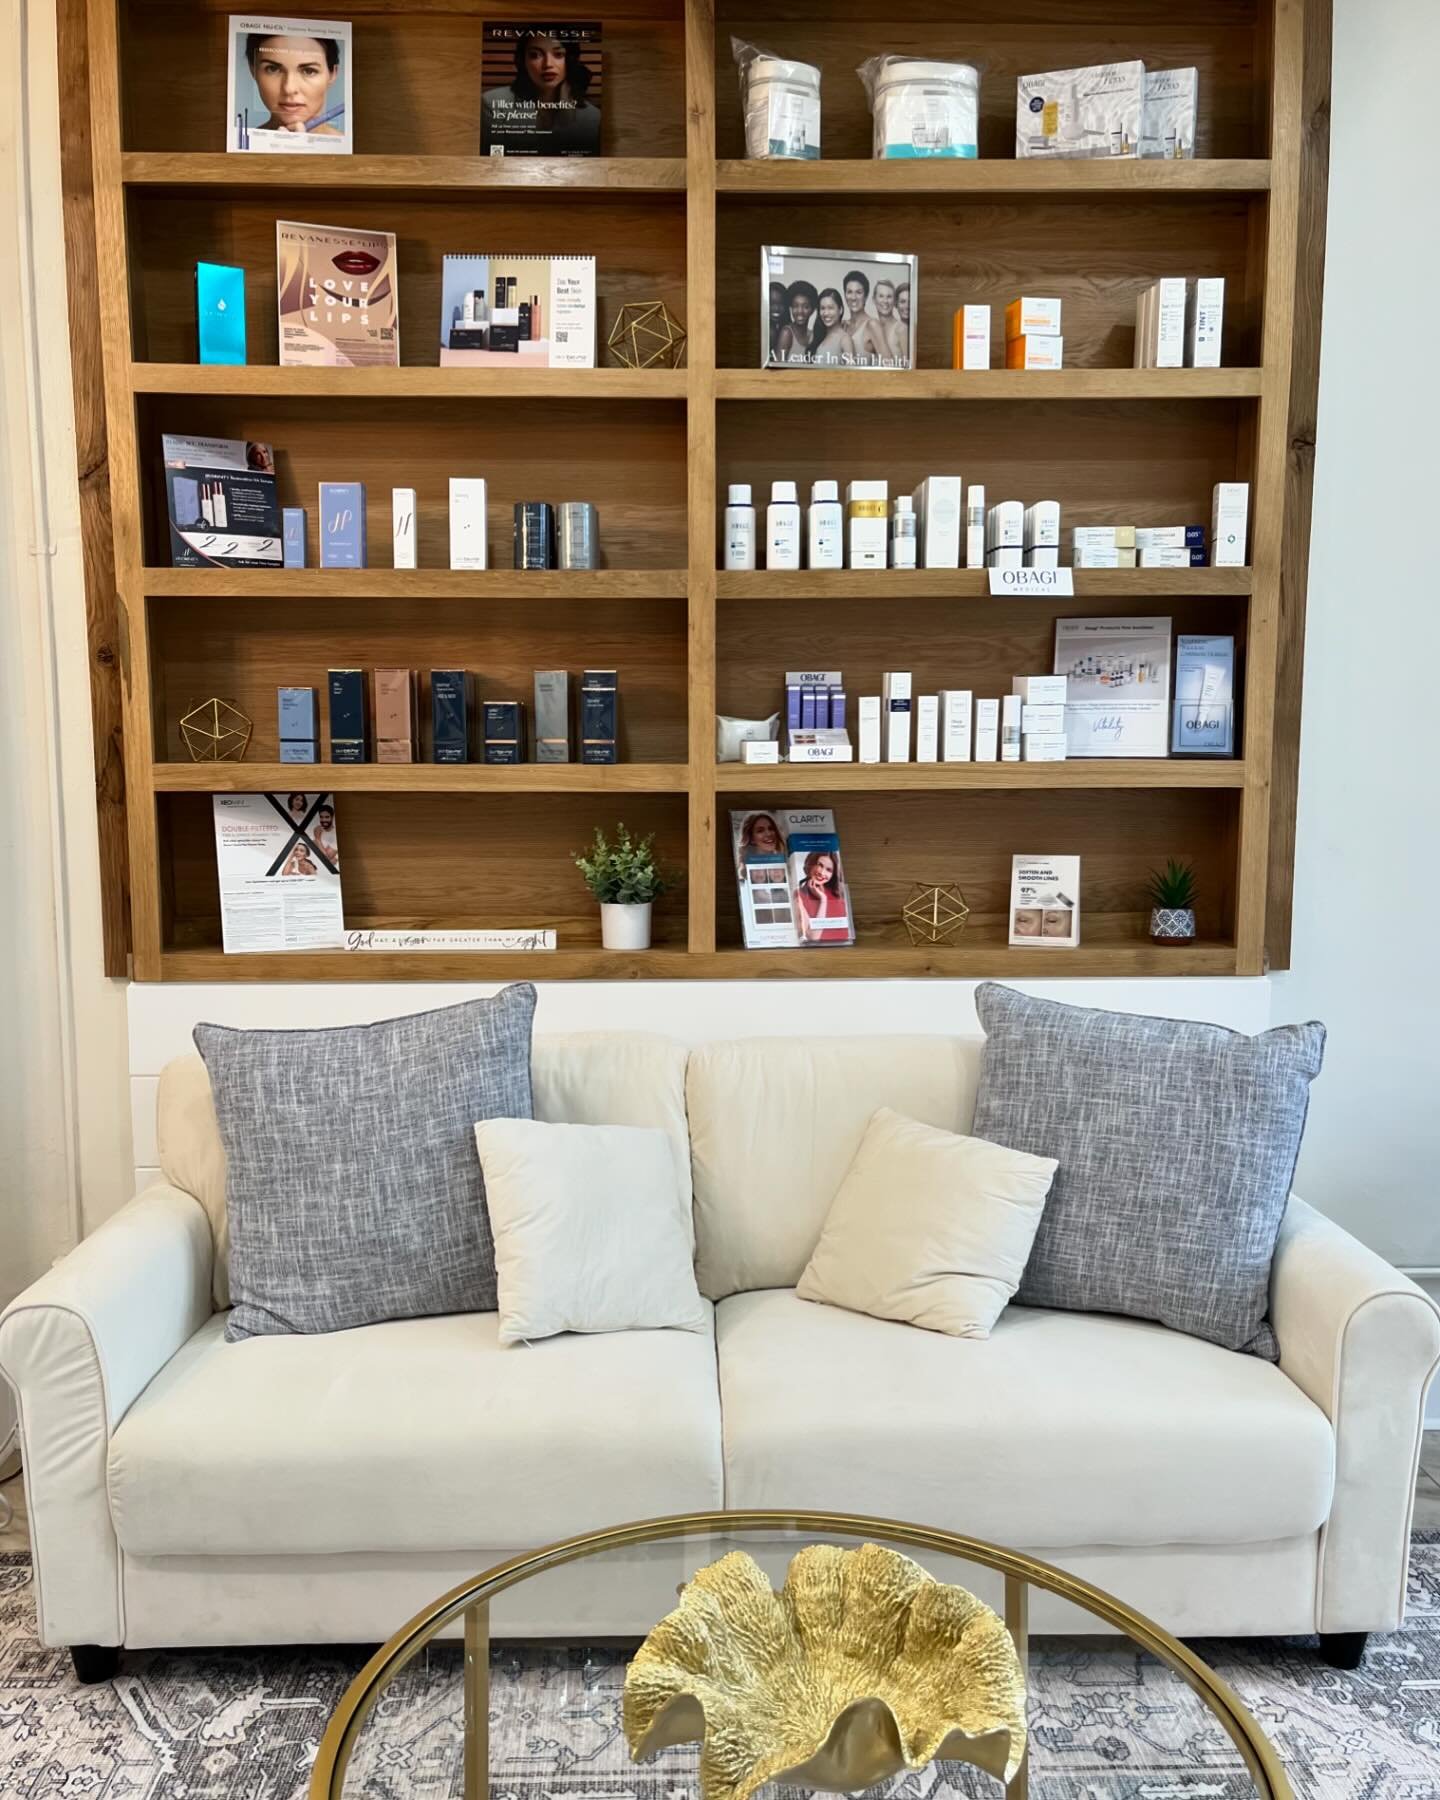 ✨ Experience the ultimate in skincare luxury✨ 

Whether you&rsquo;re seeking a relaxing facial, targeted treatments for acne or aging, or simply want to pamper yourself with the finest skincare products, we have you covered. Our expert team is dedica